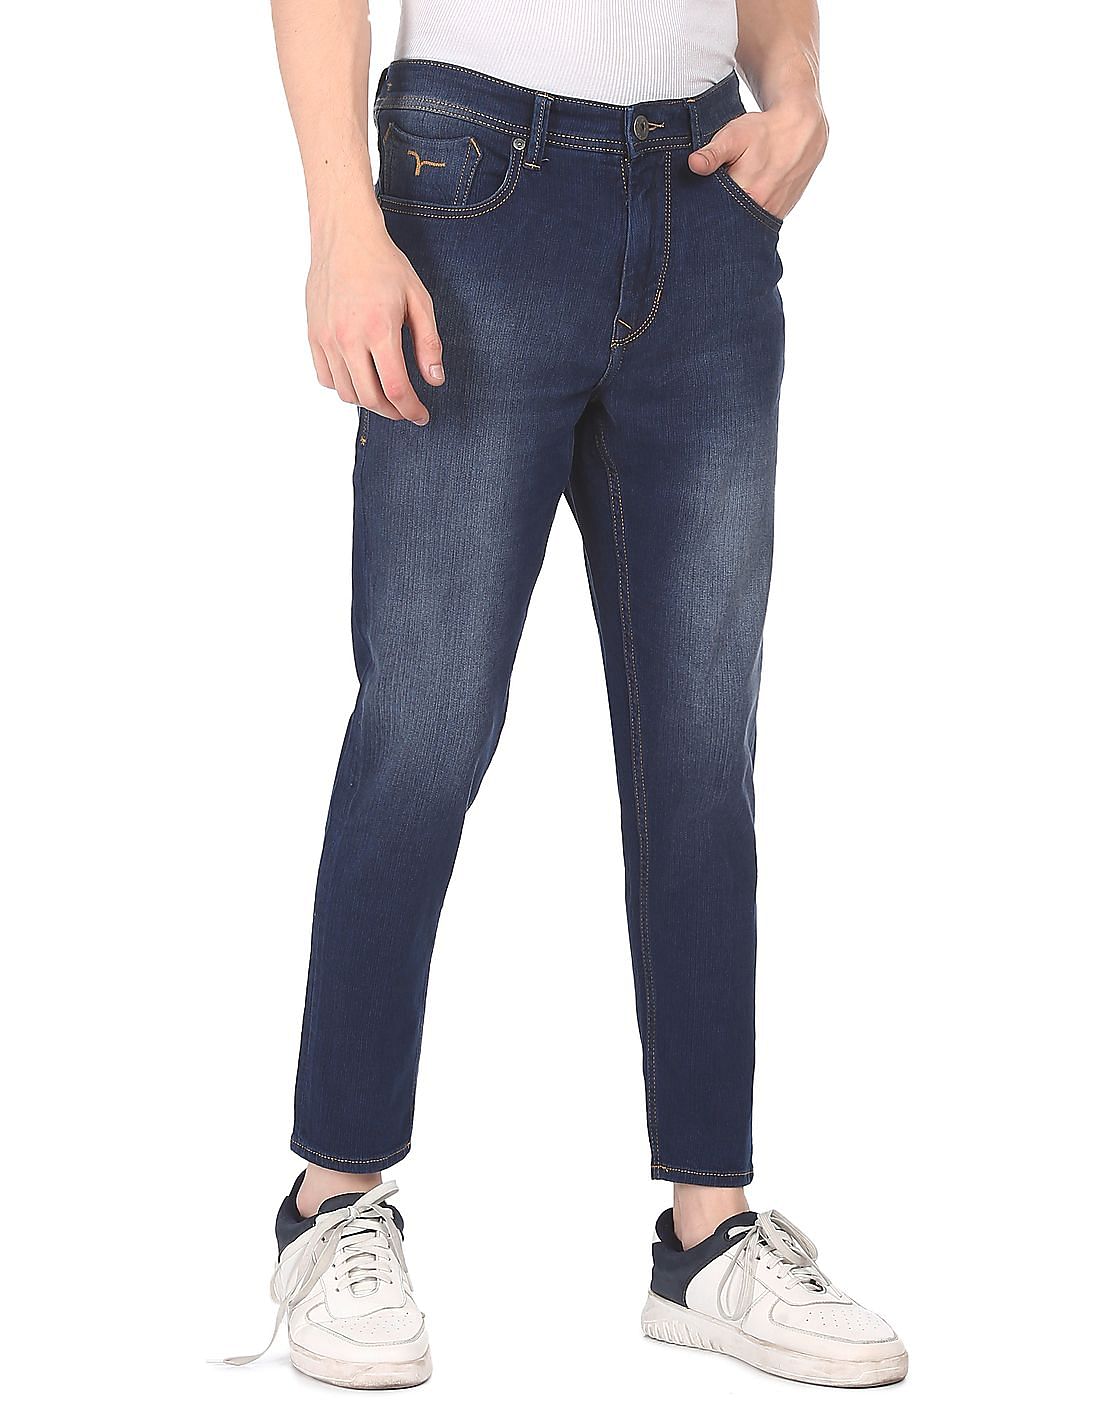 Buy Flying Machine Mankle Slim Fit Mid Rise Jeans - NNNOW.com